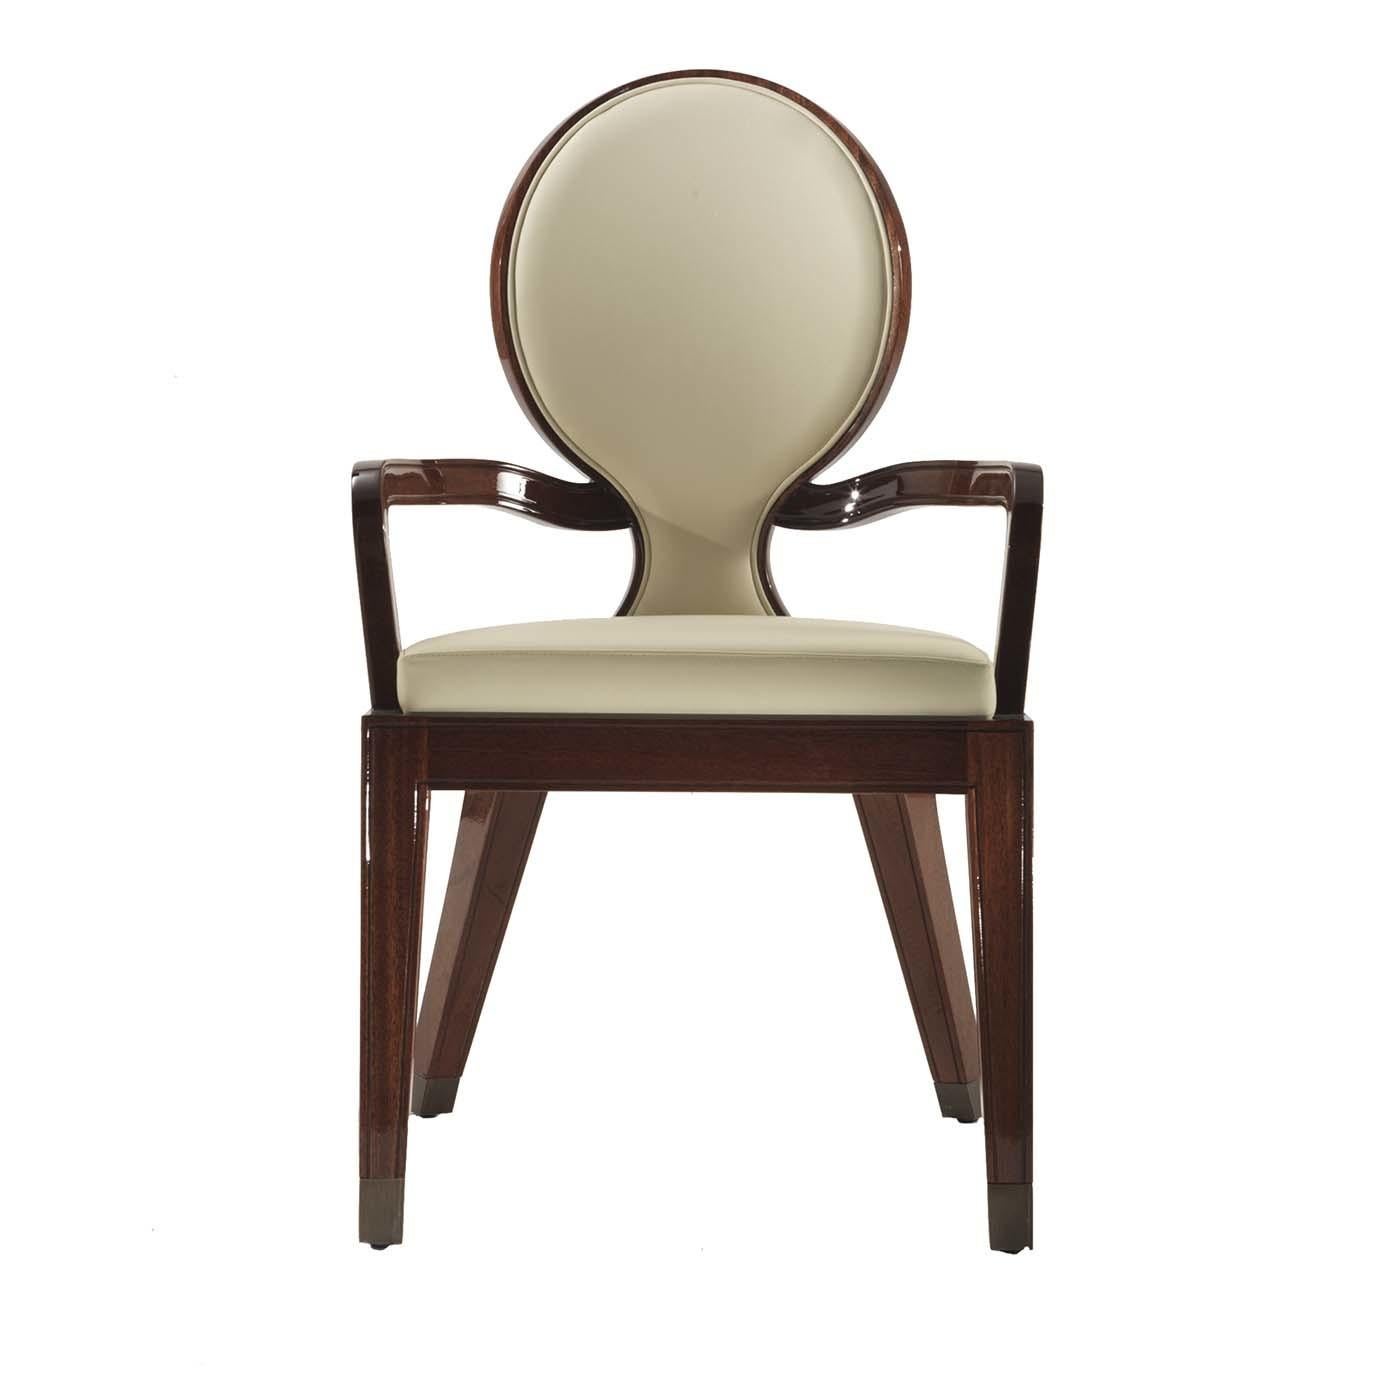 Part of a stunning series of chairs named Sun for the elegant oval-shaped backrest, this piece exudes a refined allure, thanks to its elegant silhouette that combines straight, diagonal, and sinuous lines. The structure in wood with a glossy